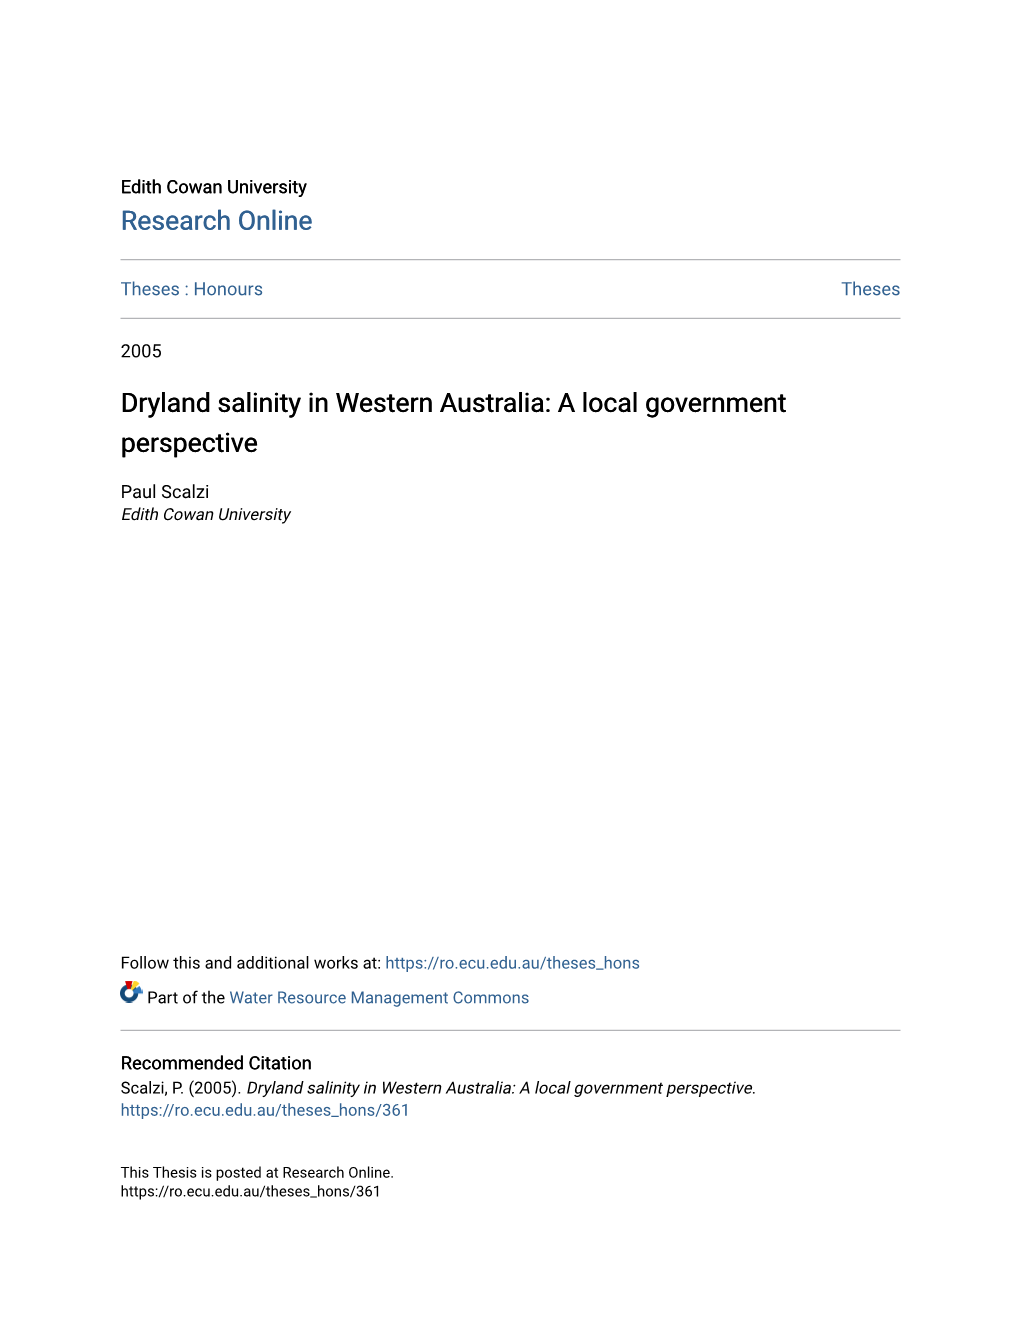 Dryland Salinity in Western Australia: a Local Government Perspective